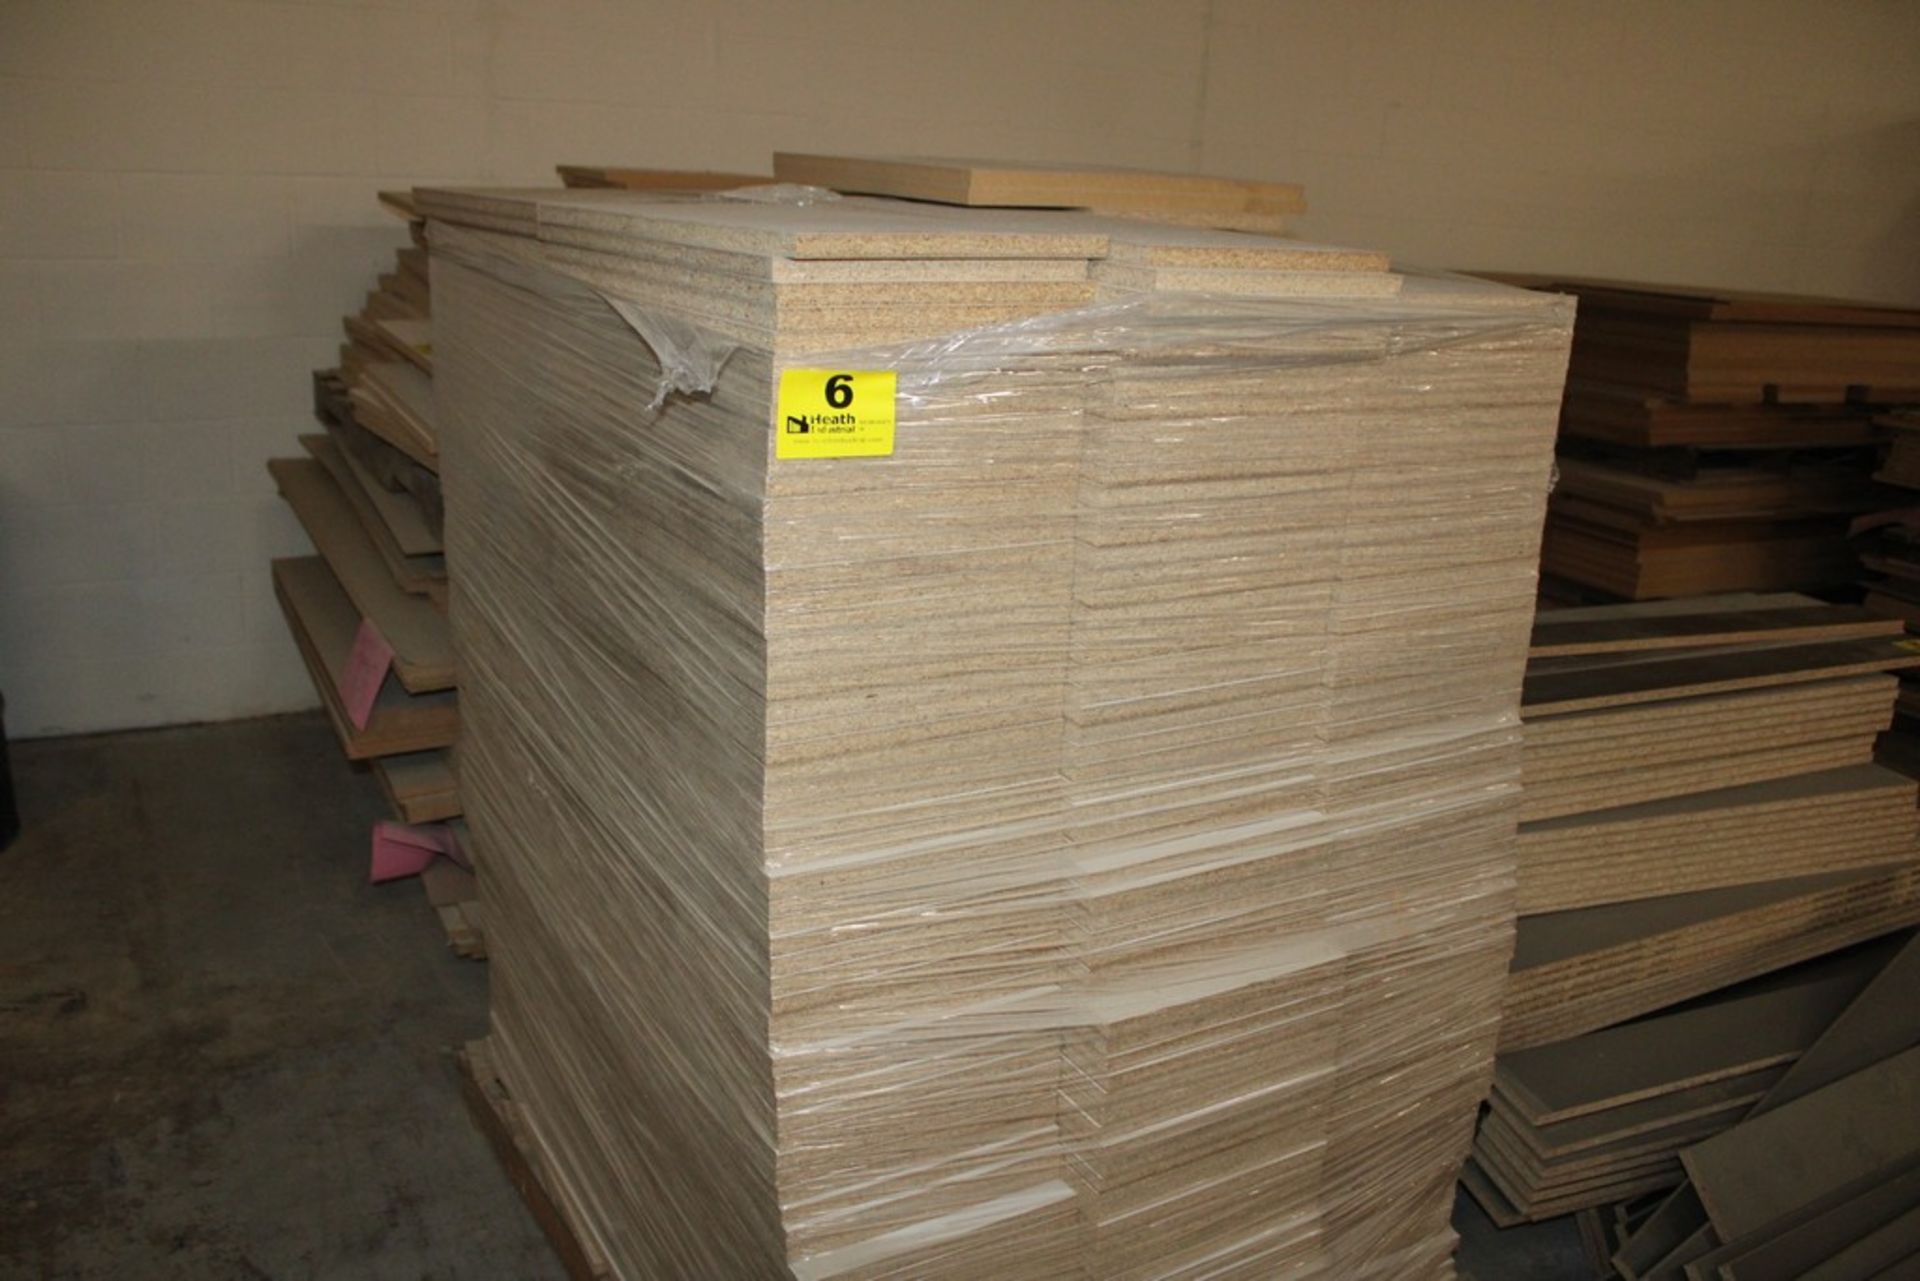 LARGE QUANTITY OF WHITE LAMINATED PARTICLE BOARDS, 12" X 24" X 3/4"